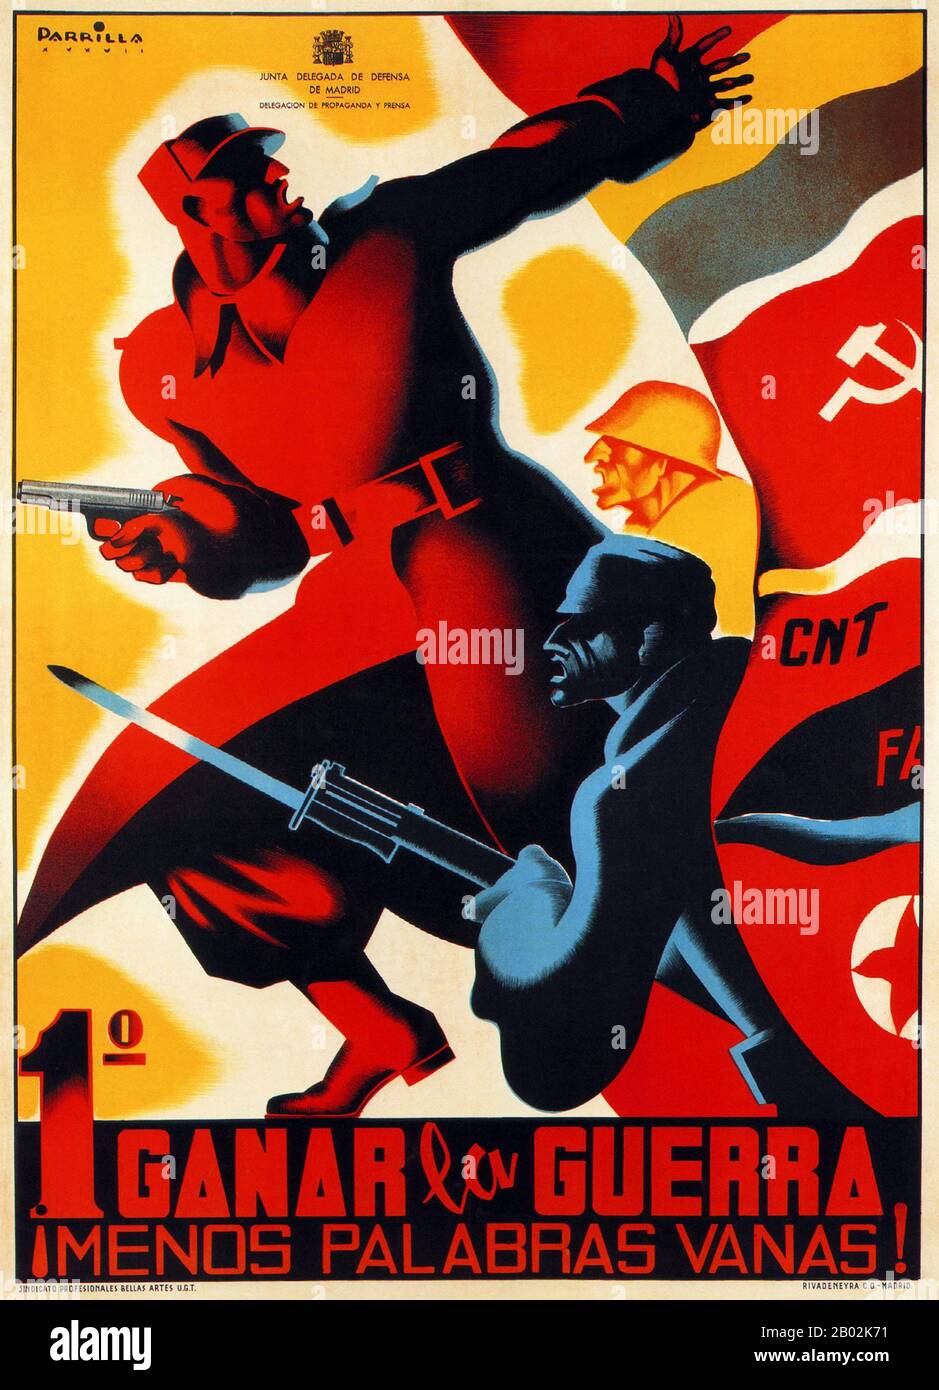 The Spanish Civil War was fought from 17 July 1936 to 1 April 1939 between the Republicans, who were loyal to the democratically elected Spanish Republic, and the Nationalists, a rebel group led by General Francisco Franco. The Nationalists prevailed, and Franco ruled Spain for the next 36 years, from 1939 until his death in 1975.  The Nationalists advanced from their strongholds in the south and west, capturing most of Spain's northern coastline in 1937. They also besieged Madrid and the area to its south and west for much of the war. Capturing large parts of Catalonia in 1938 and 1939, the w Stock Photo